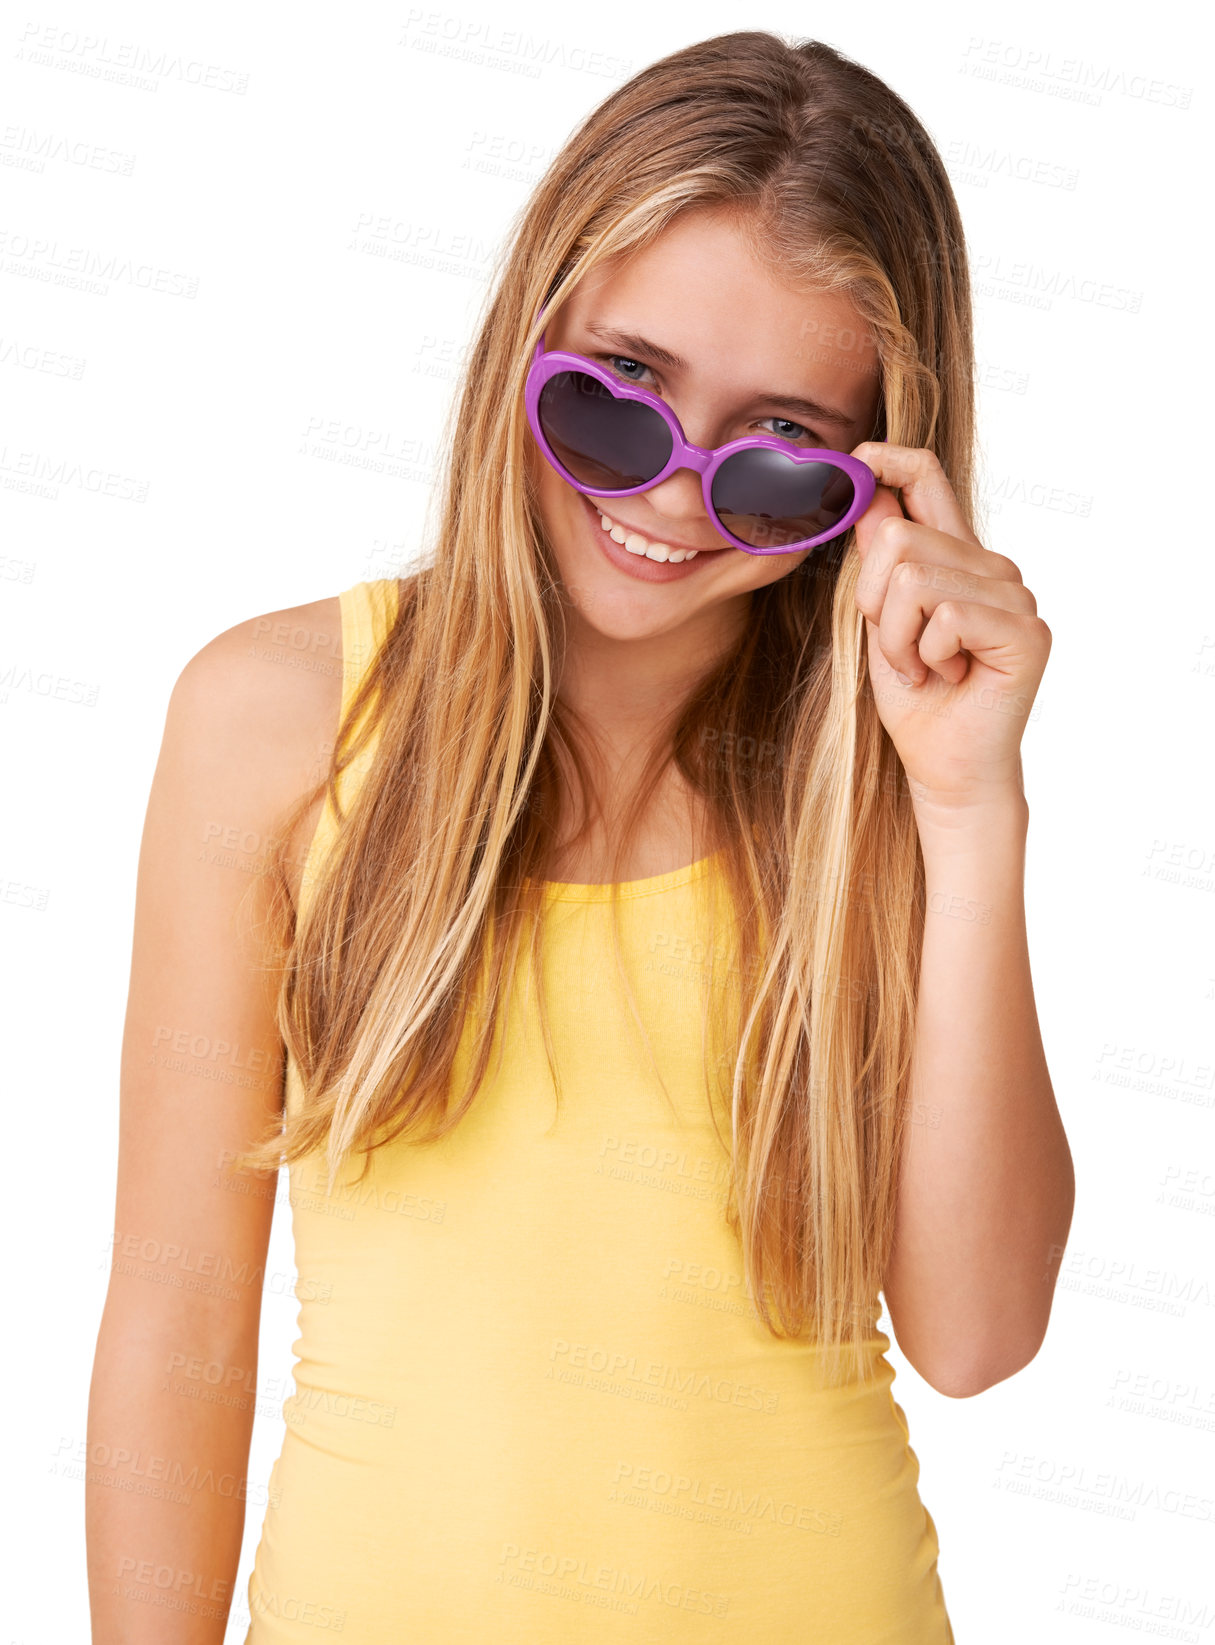 Buy stock photo Portrait of a cute teen girl peering over her heart-shaped glasses